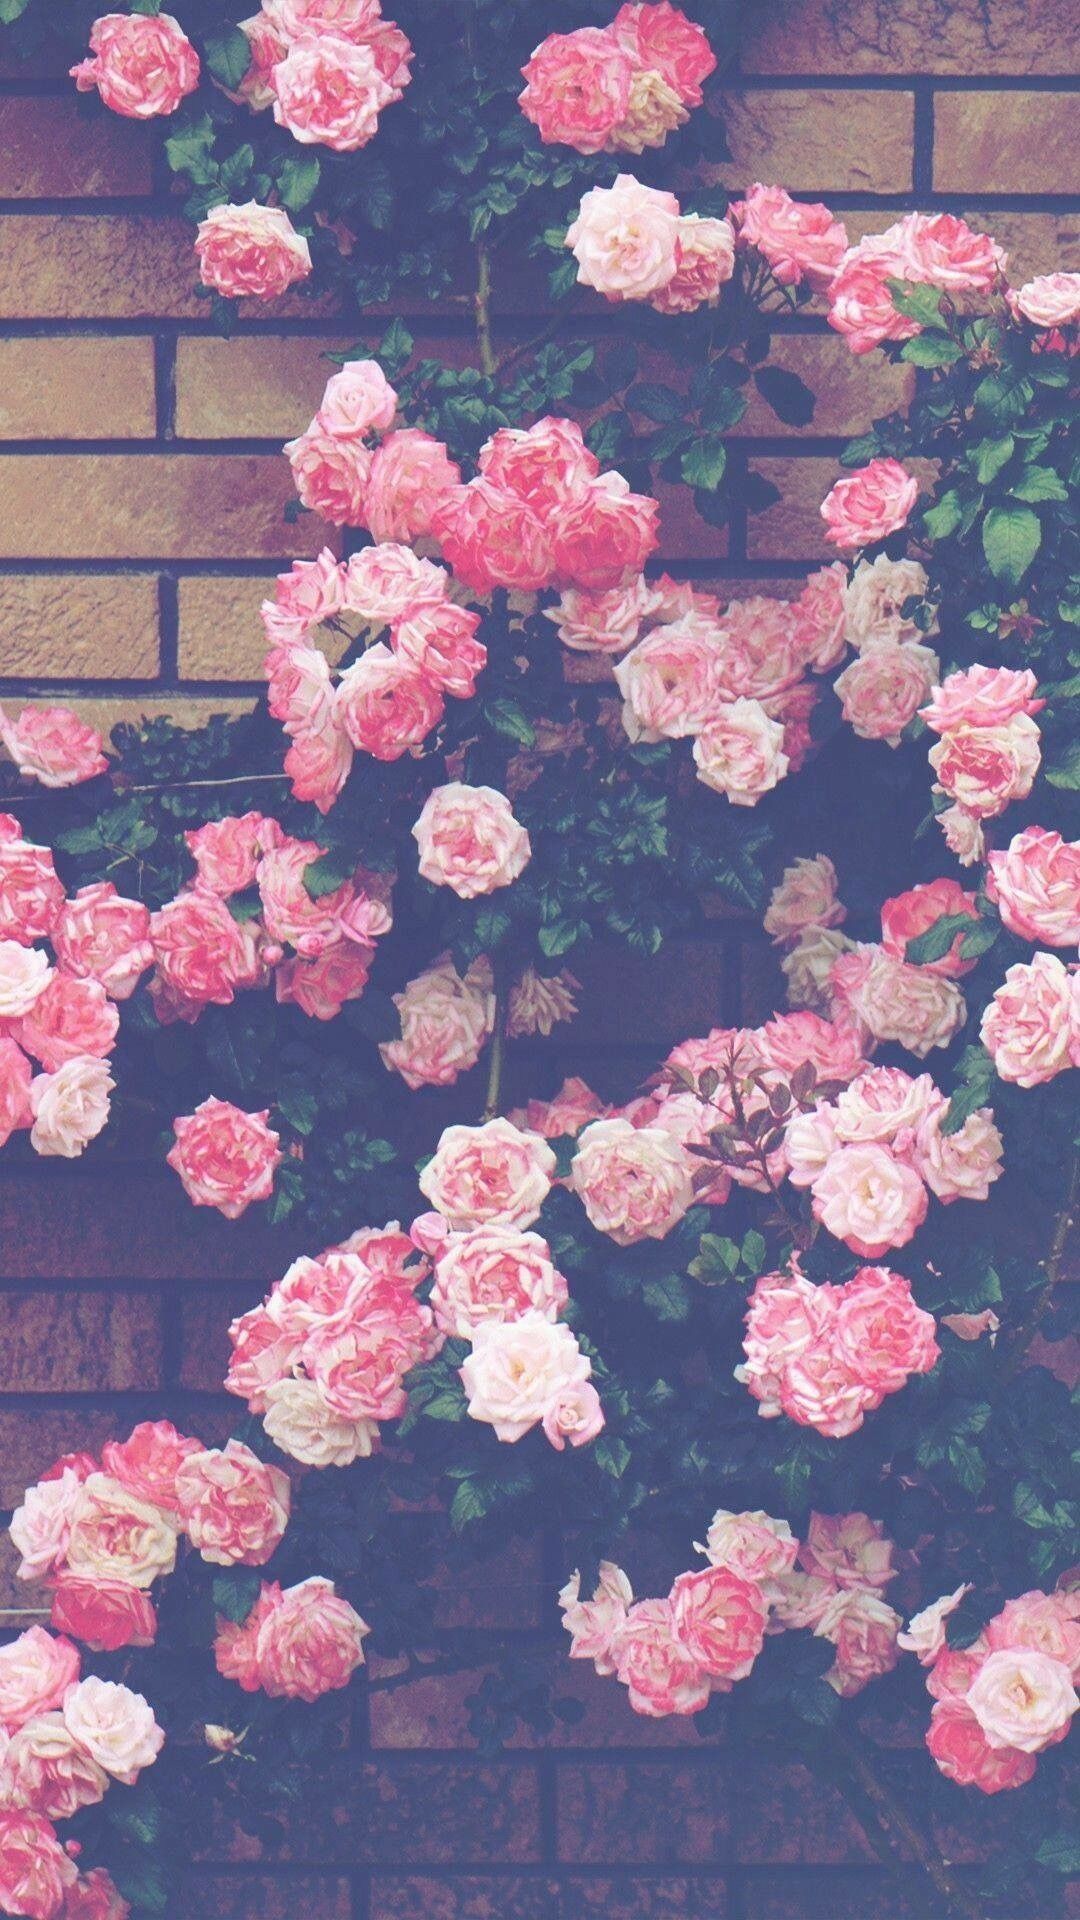 Pastel Aesthetic Rose Wallpapers